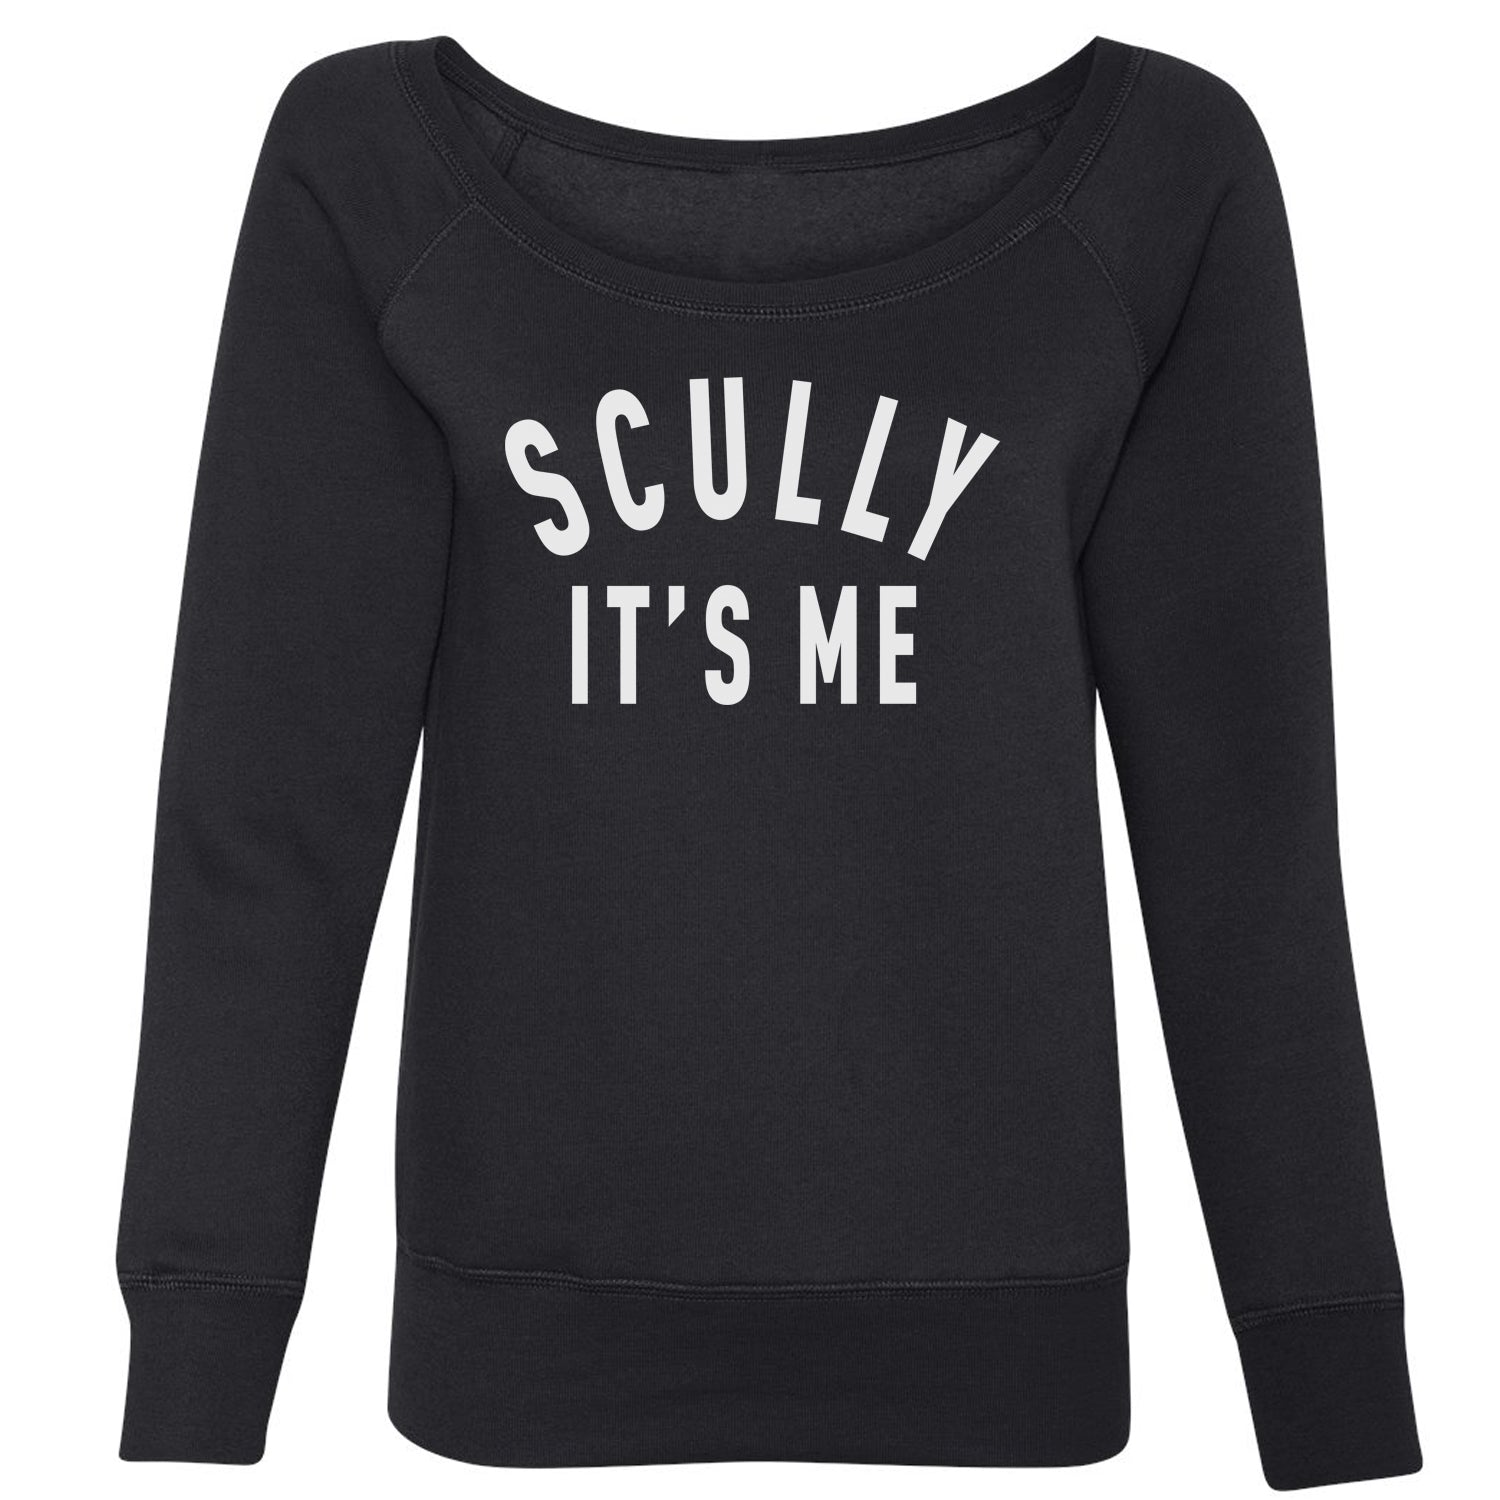 Scully, It's Me Slouchy Off Shoulder Oversized Sweatshirt #expressiontees by Expression Tees